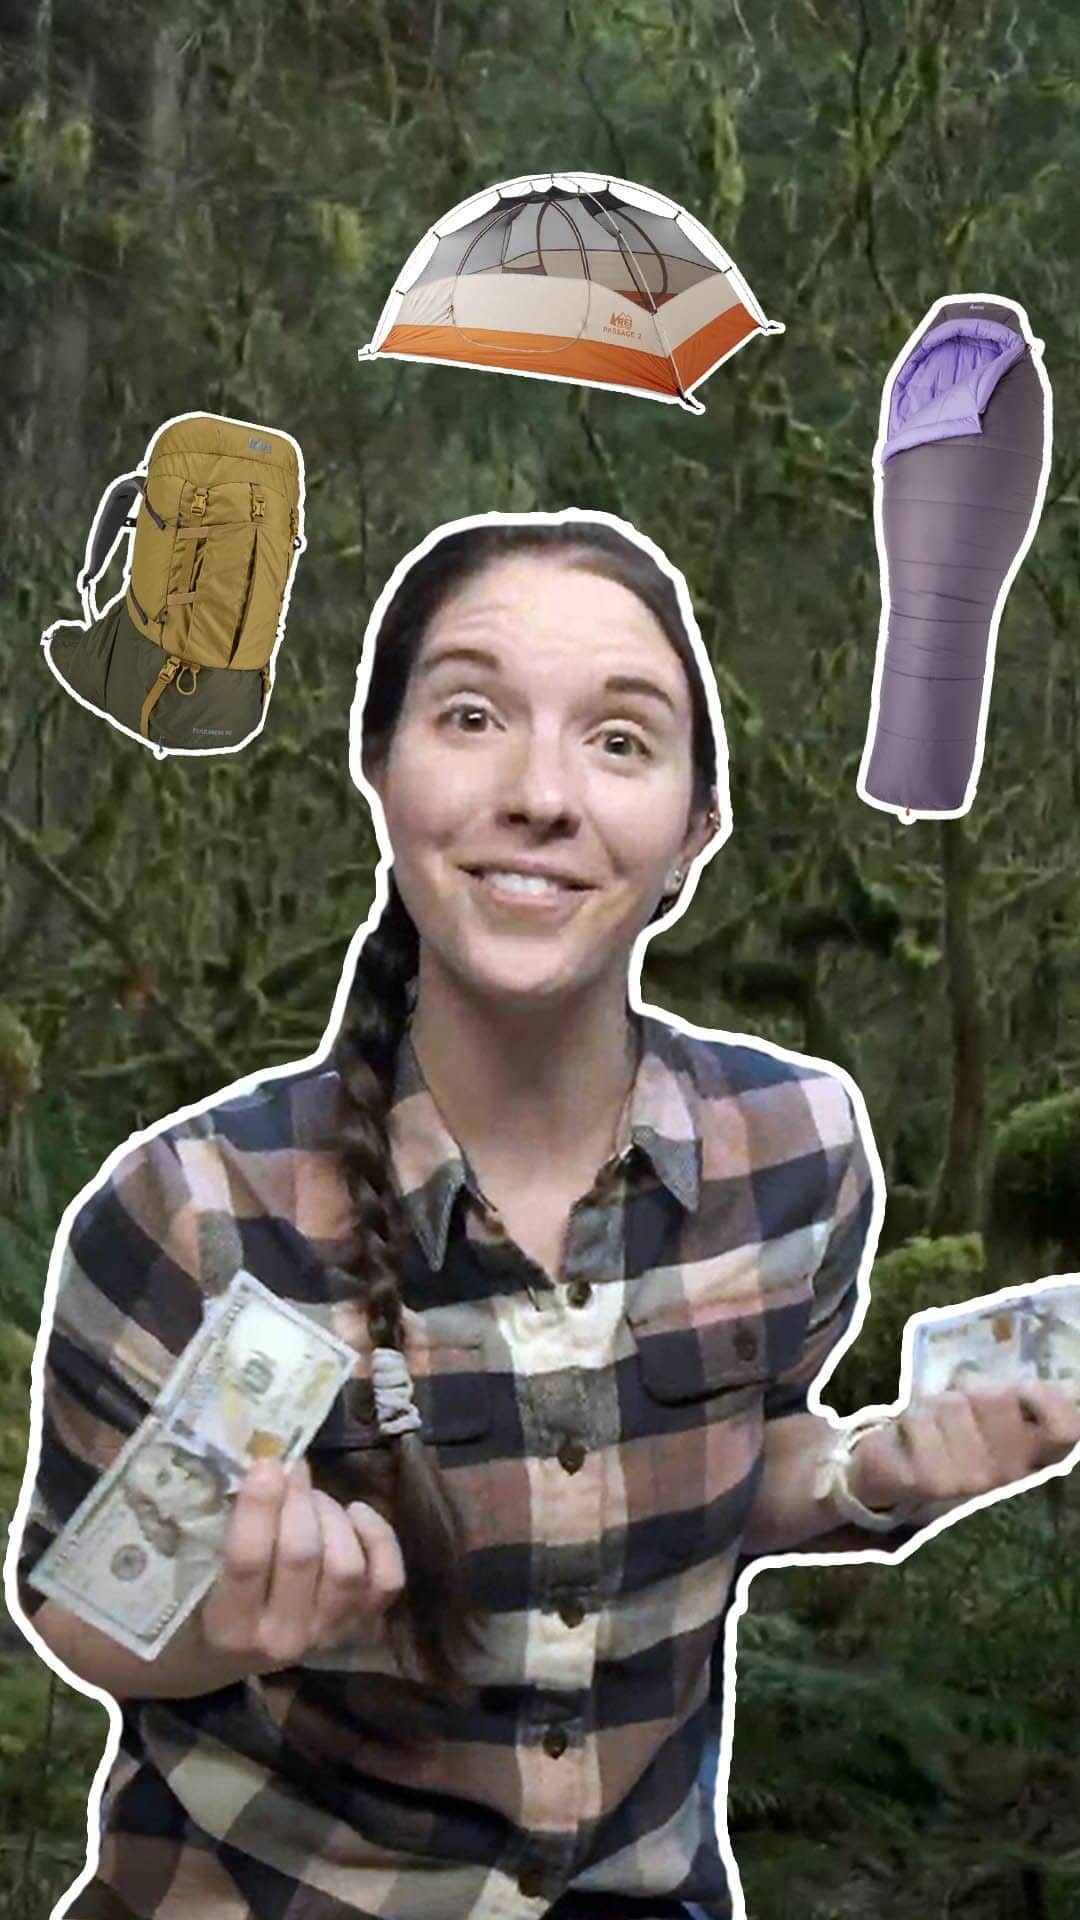 REIのインスタグラム：「Over the last 10 years, @mirandagoesoutside has acquired all of her trusty backpacking gear. But for this episode, she starts at square one and attempts to gear up for a backpacking trip for less than $200. Watch the full video in IGTV to see if she pulls it off.」